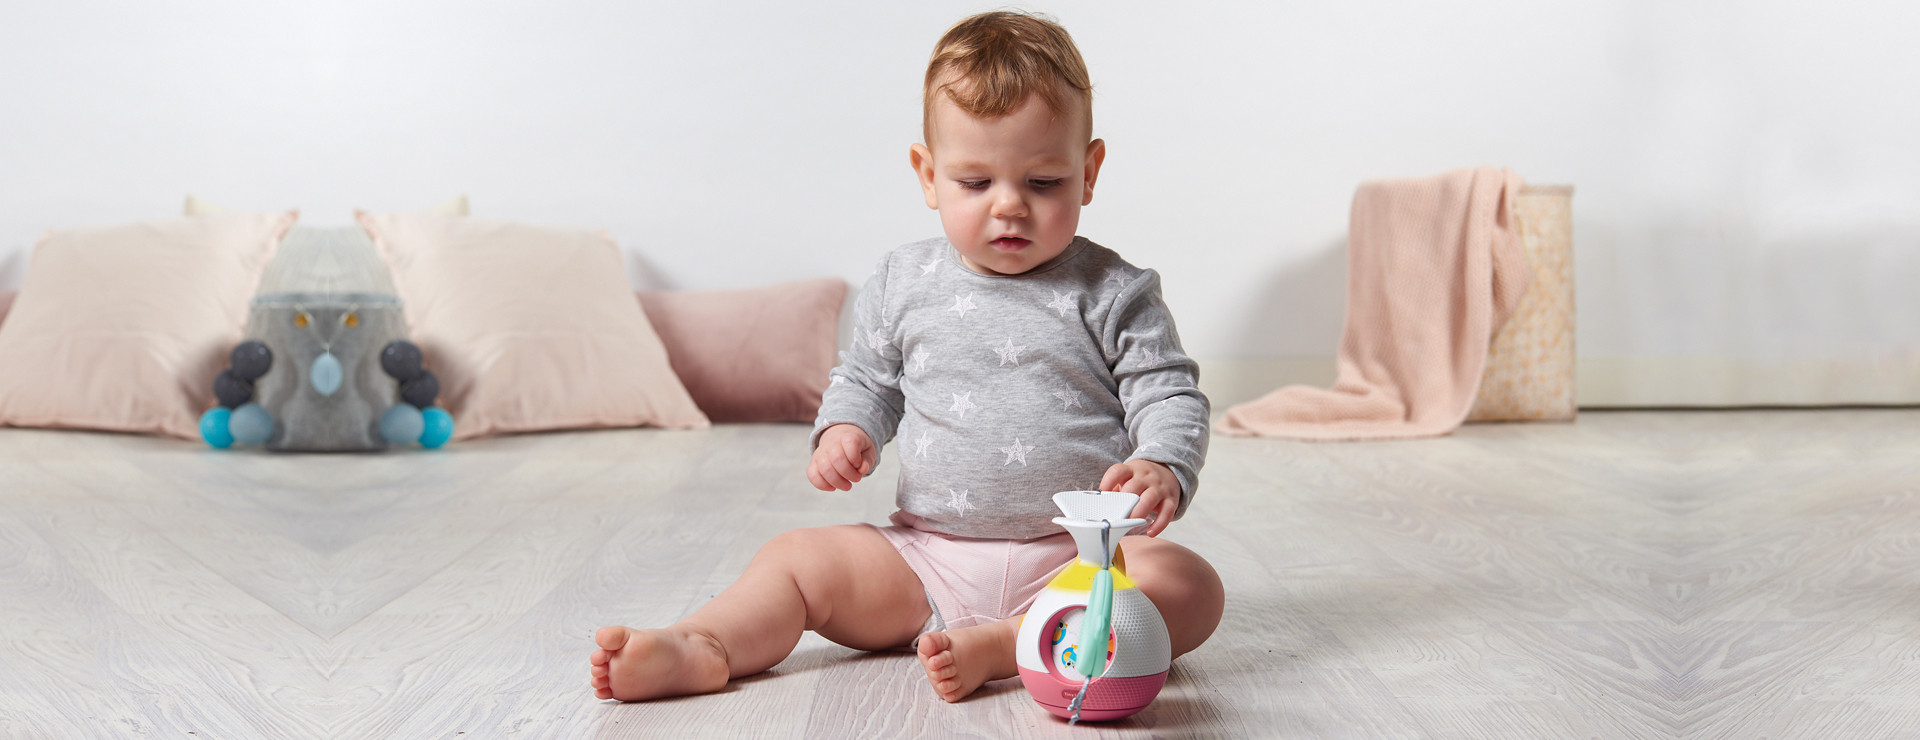 Promotes baby’s gross motor skills, senses, cognition and more